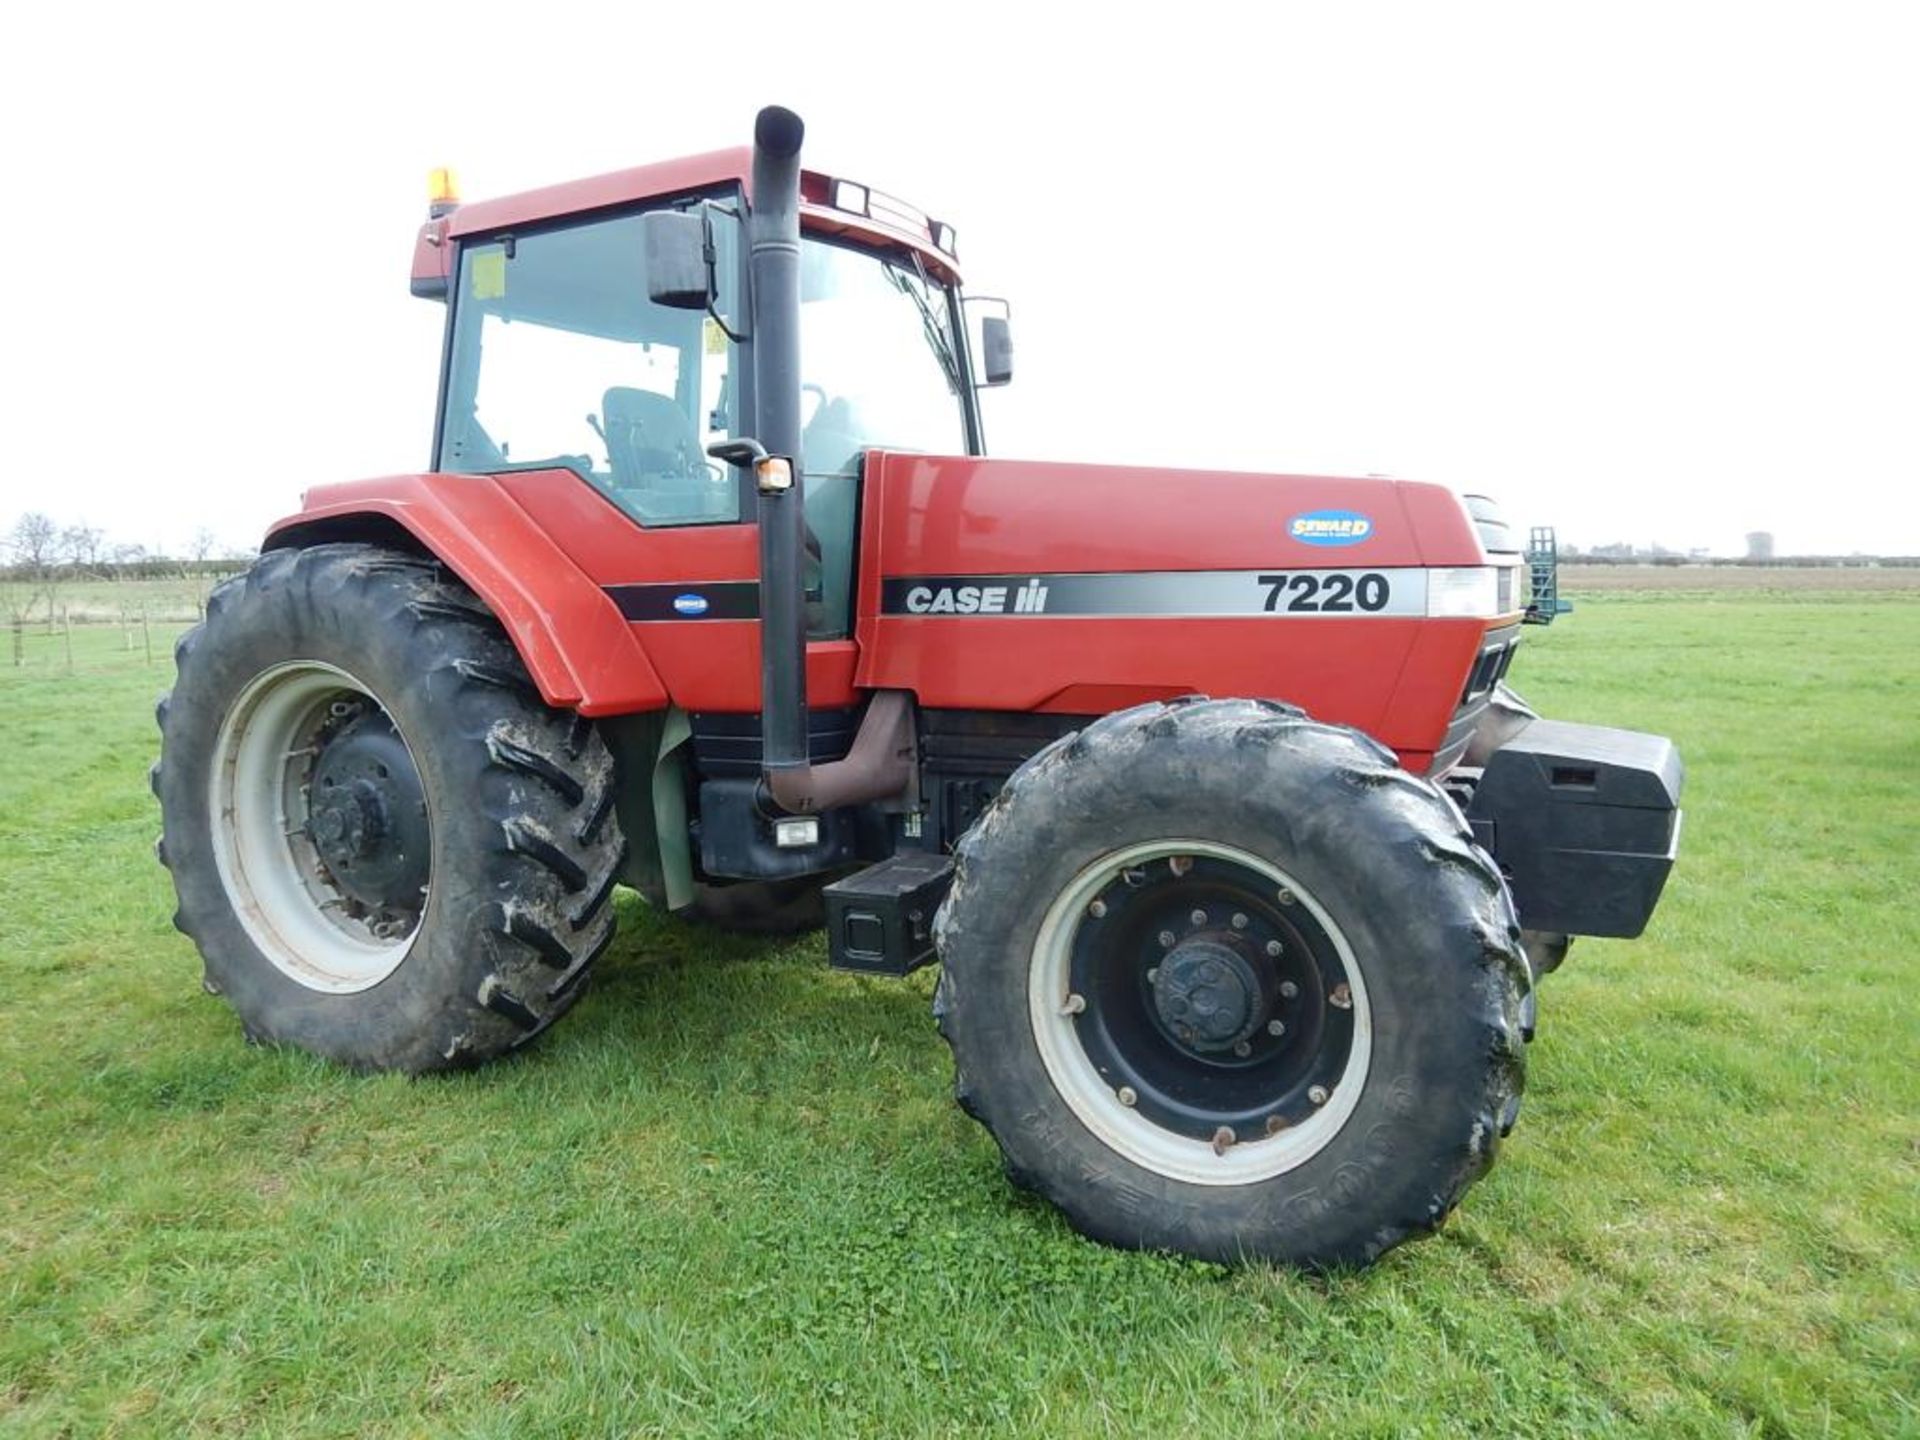 1997 CASE IH 7220 Magnum 4wd TRACTOR Fitted with front weights on 20.8R42 rear and 16.9R30 Goodyears - Image 2 of 6